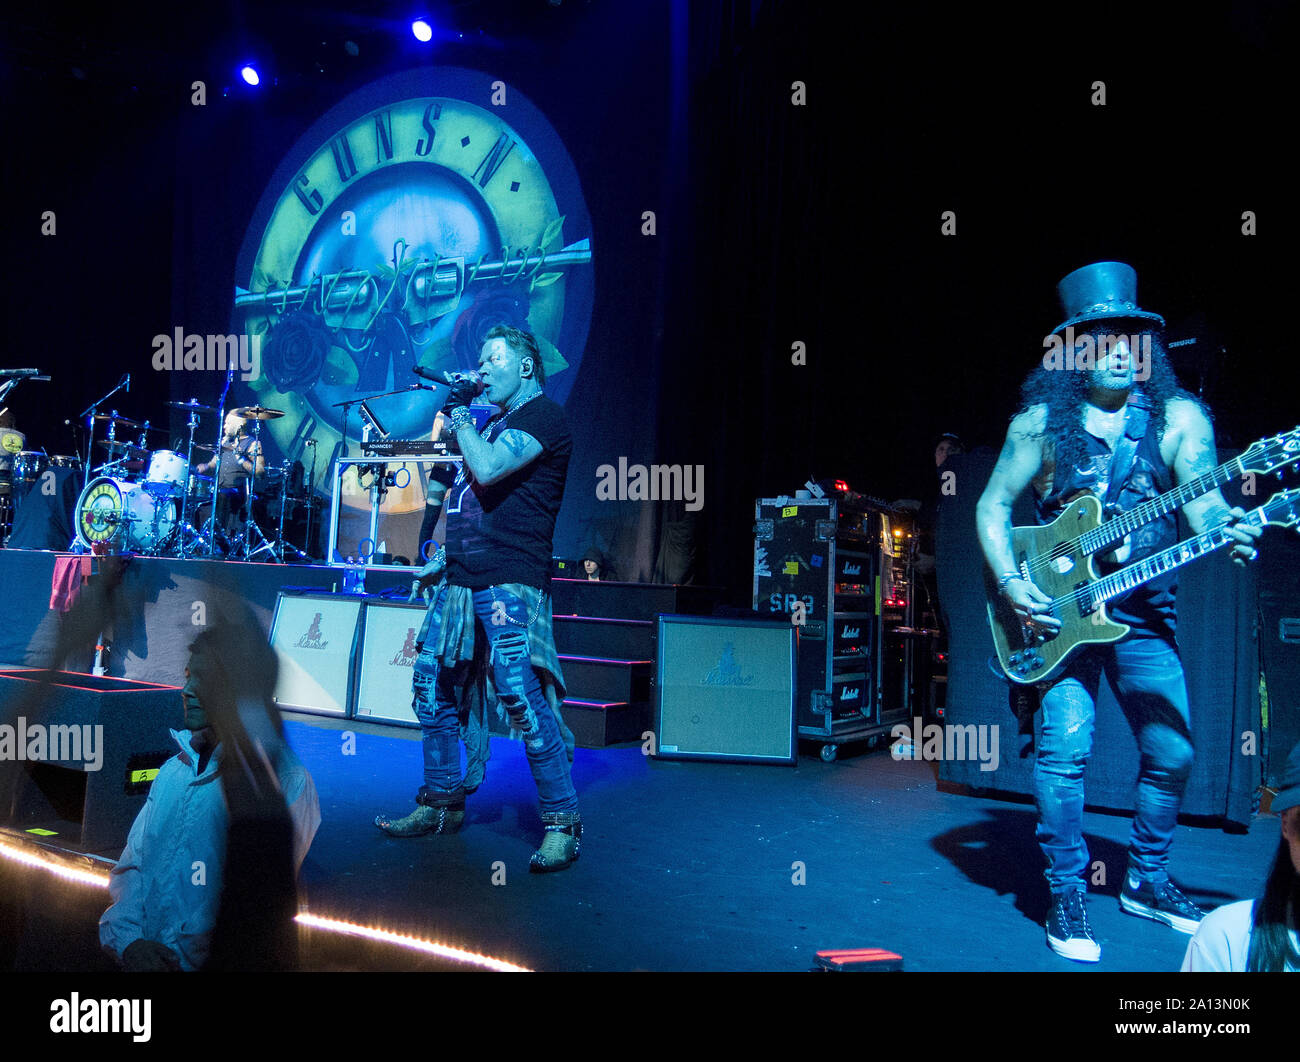 September 22, 2019, Hollywood, California, U.S: Singer Axl Rose, left, and  guitarist Slash of the rock band Guns N' Roses perform live on stages  during a concert at the Hollywood Palladium. (Credit